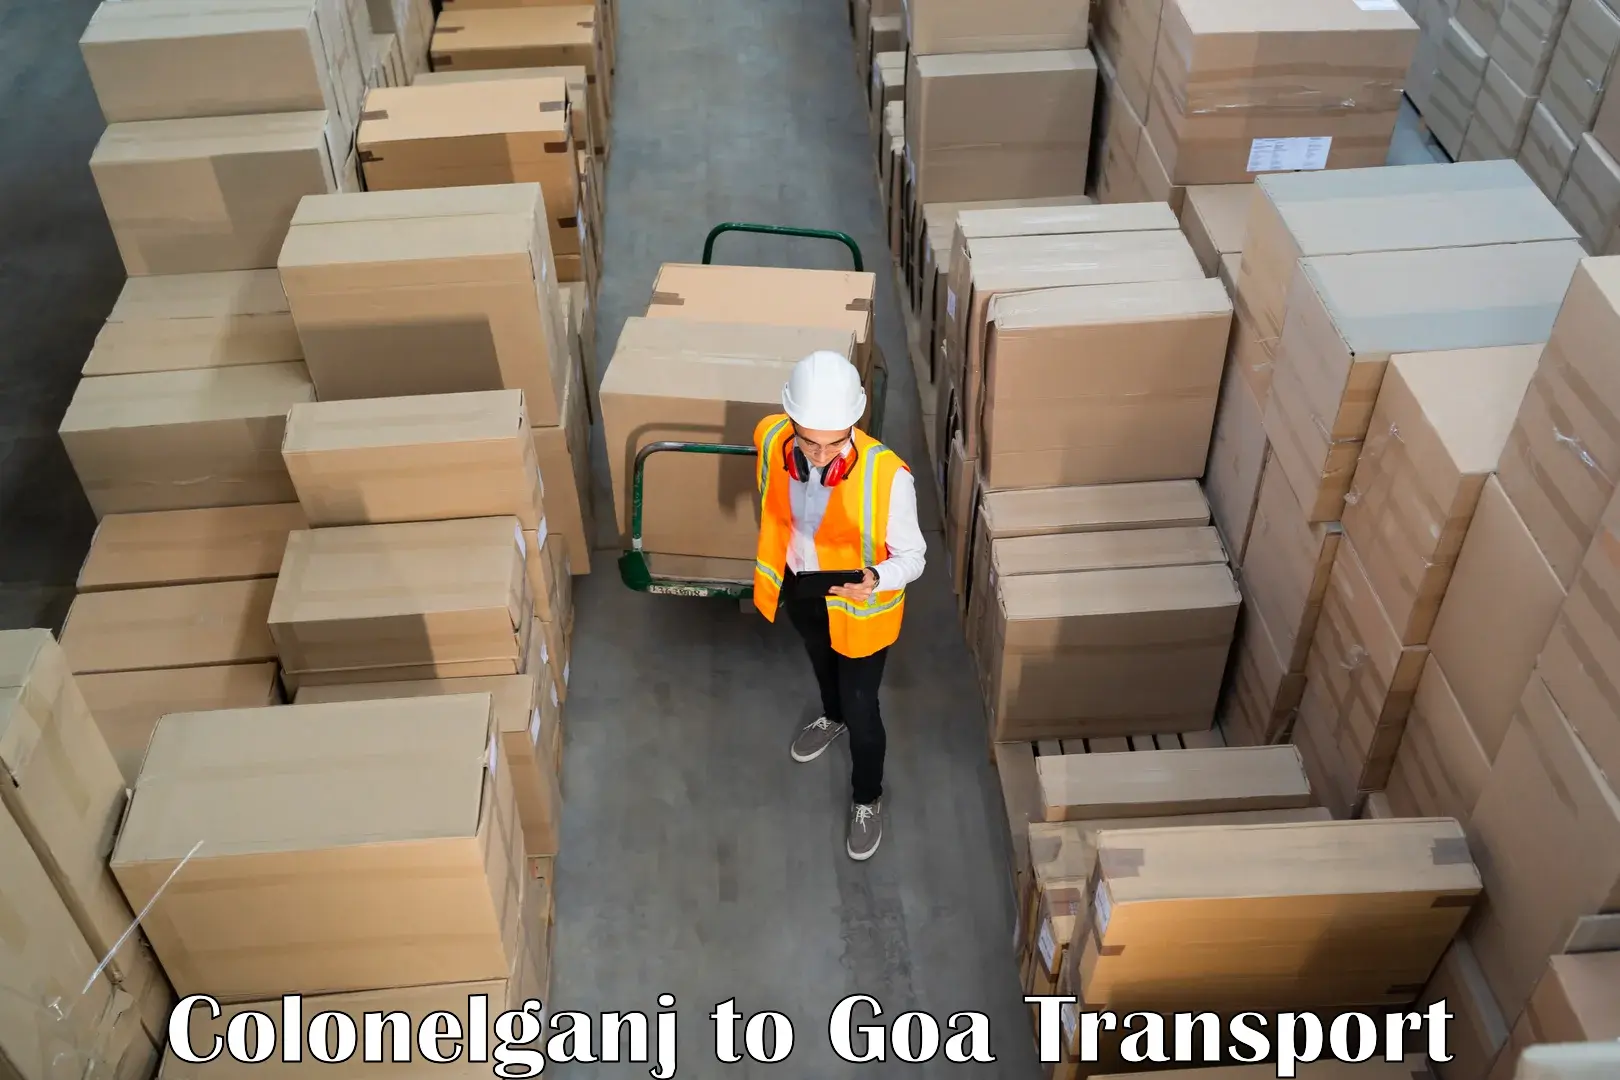 Transport bike from one state to another Colonelganj to Goa